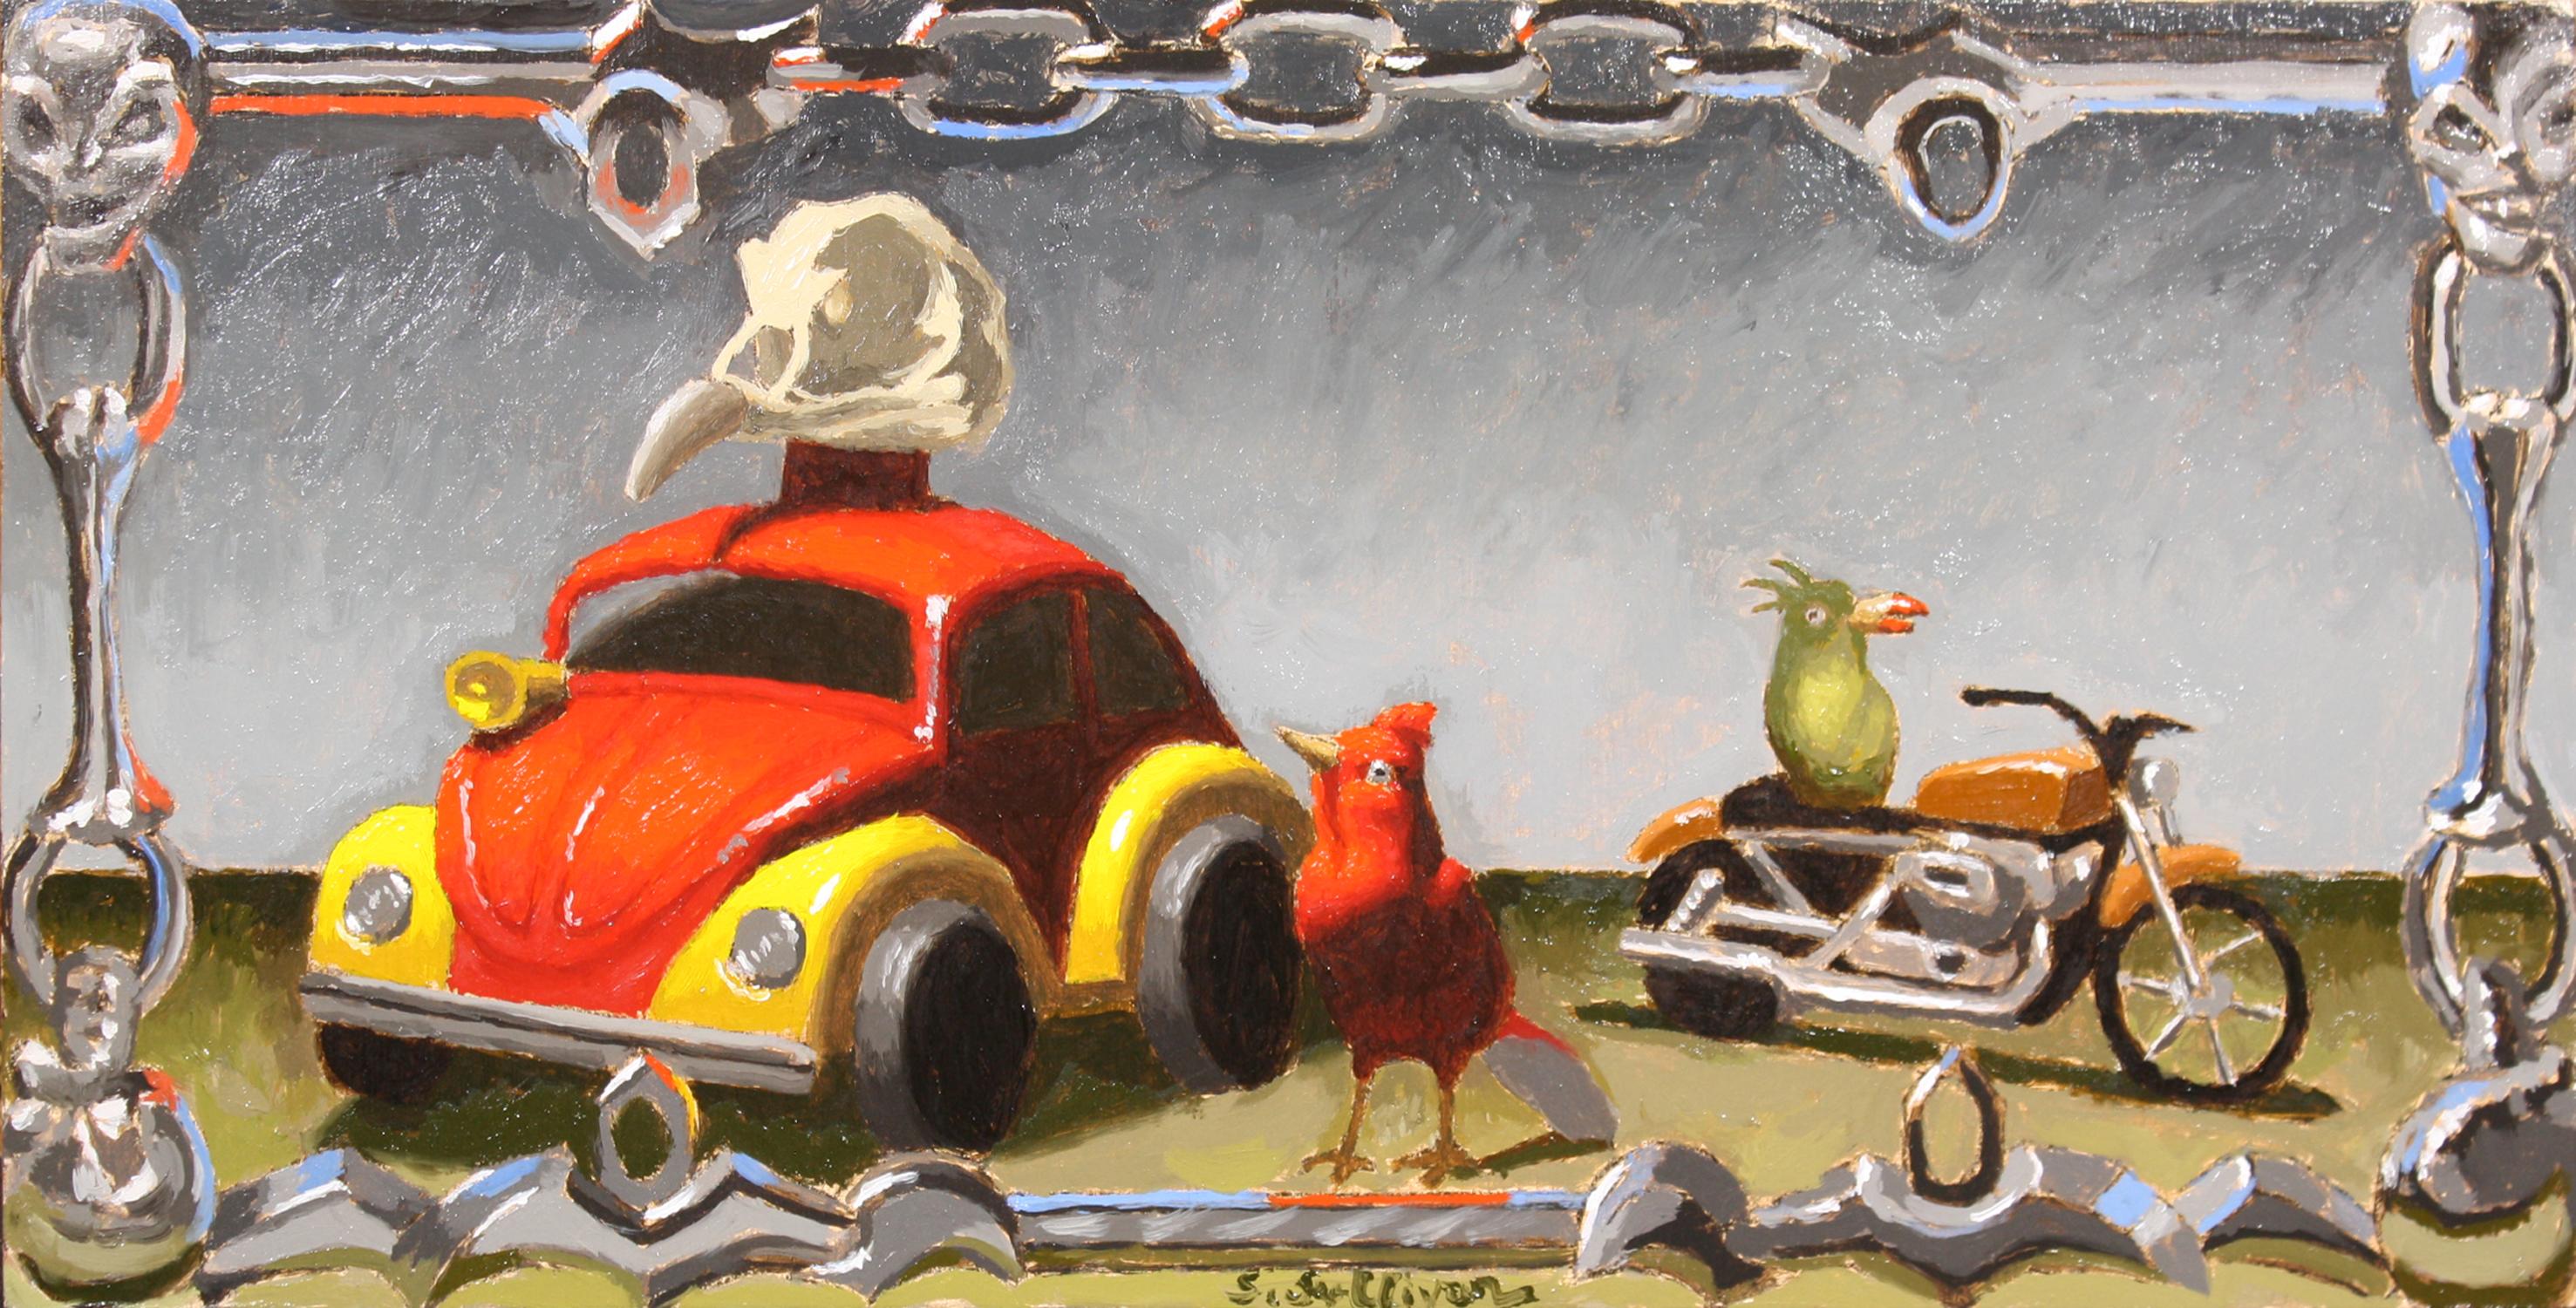 "Road Warriors" Oil Painting of Red Bird and Toy Volkswagen Bug - Art by Shawn Sullivan